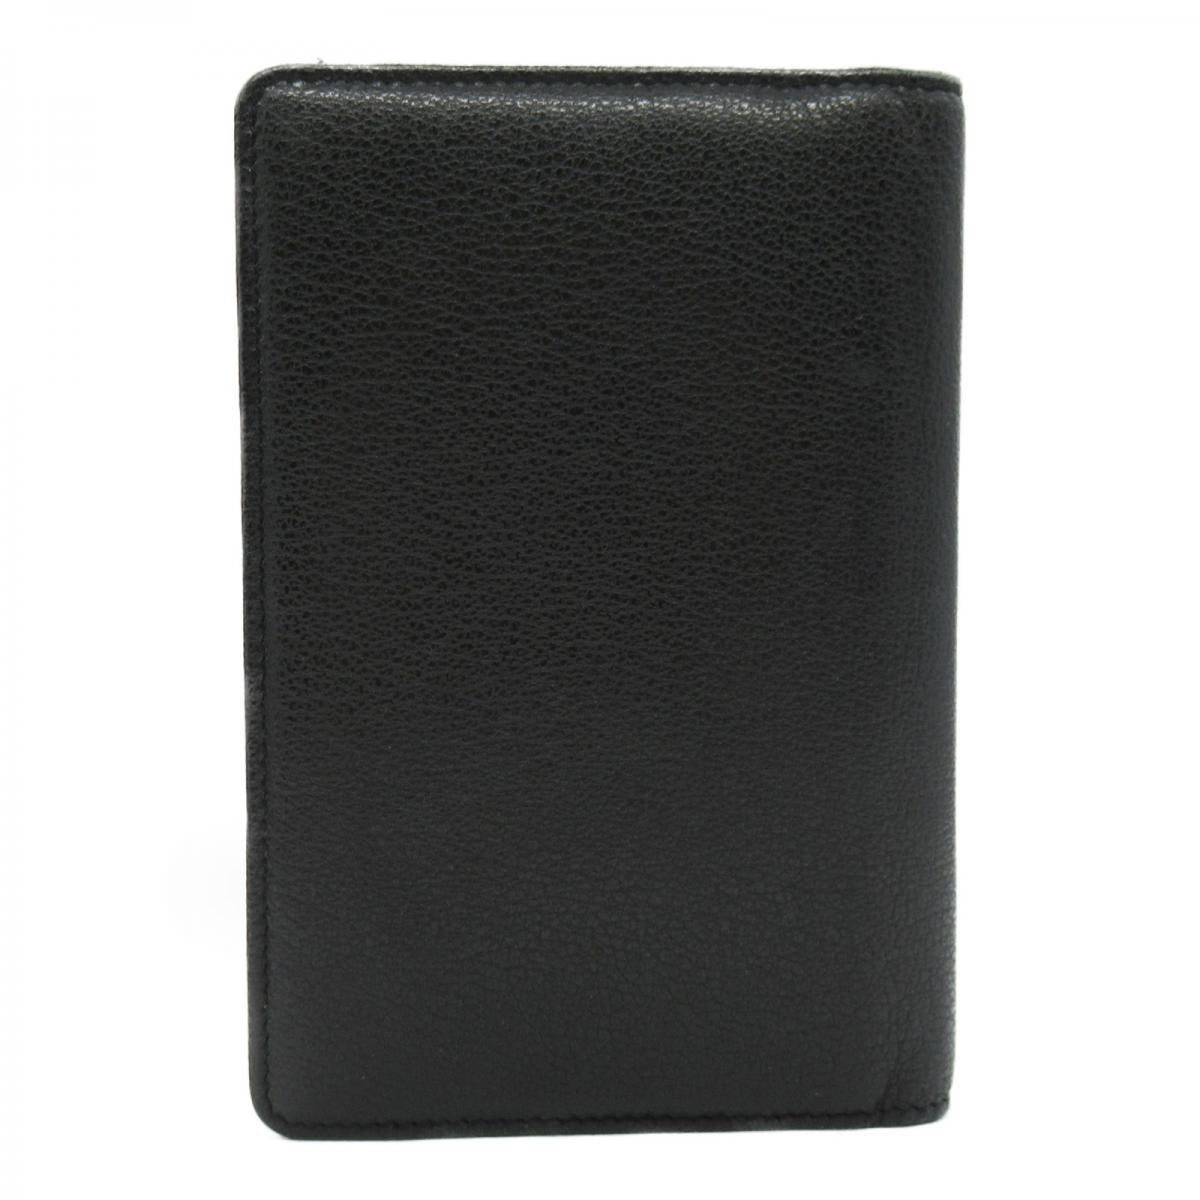 Leather Notebook Cover